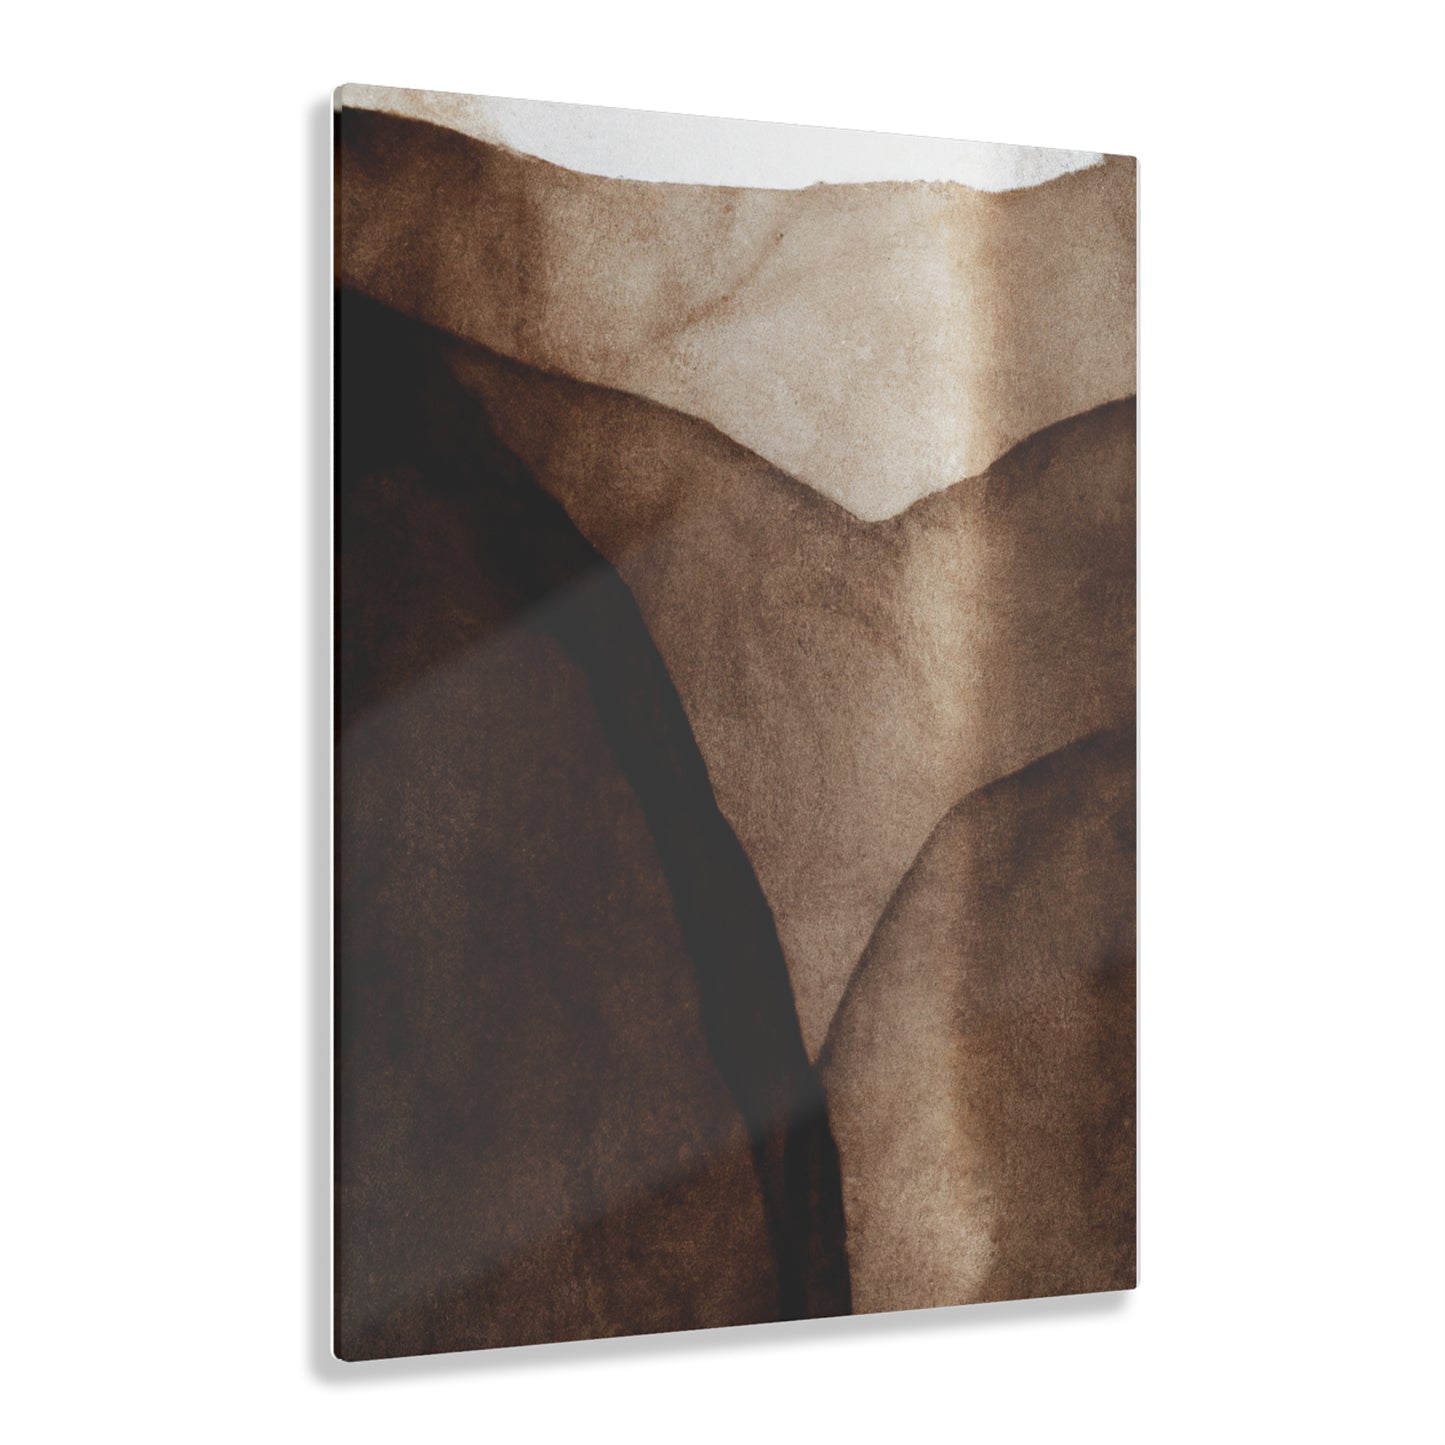 Acrylic Print - Abstract - Painting - Coffee Painting - "Caffeined Hues"